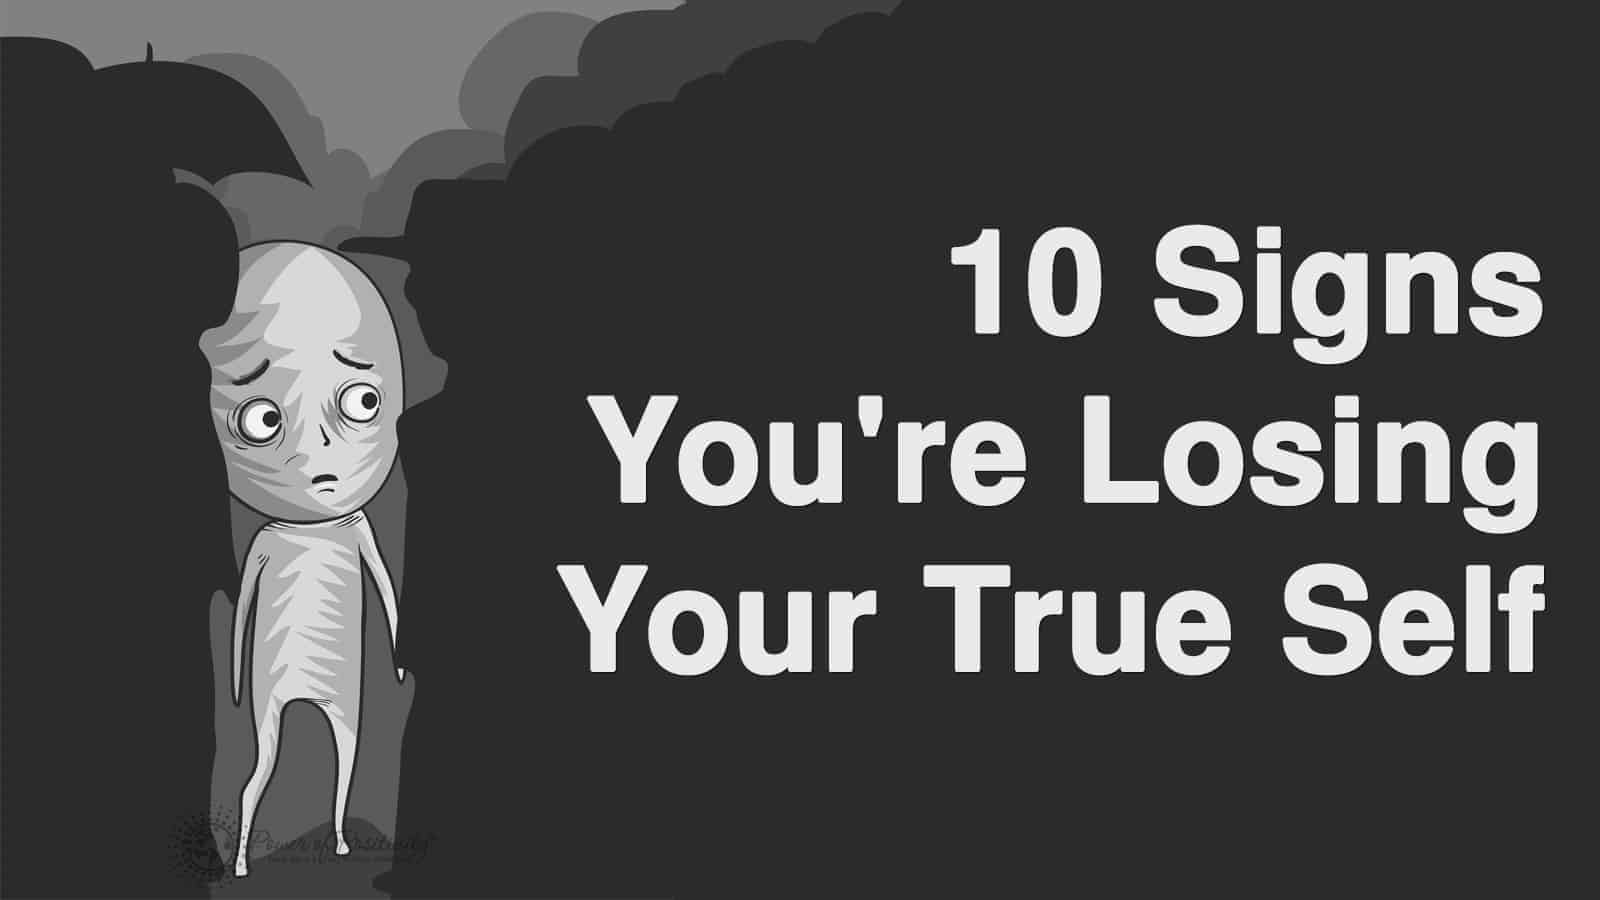 10 Signs You're Losing Your True Self